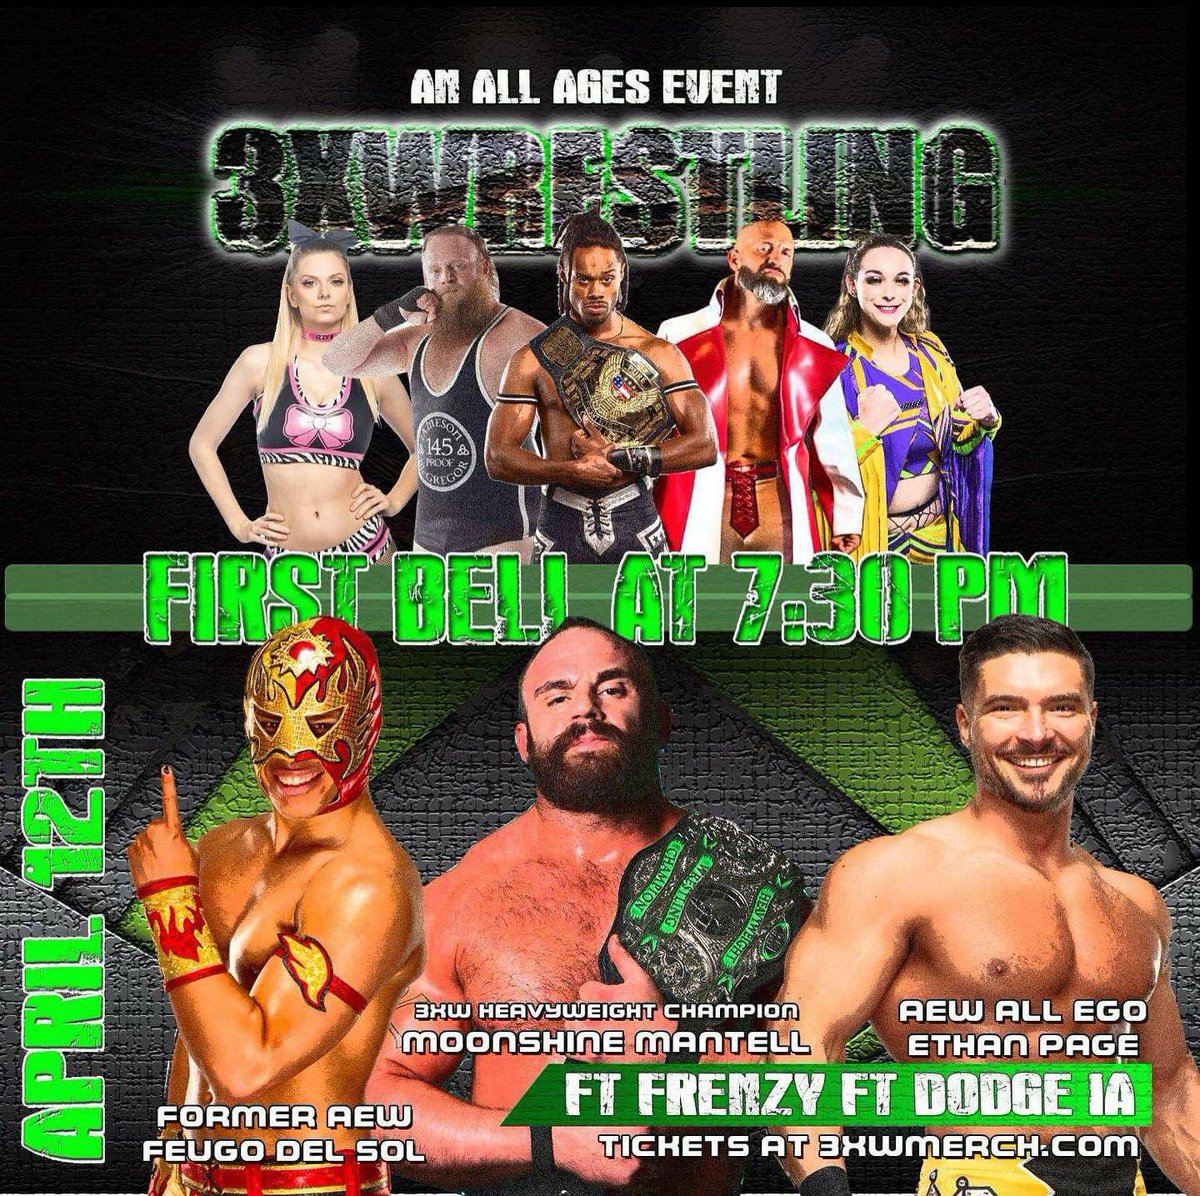 Tickets Available at the door for Fridays show at Fort Frenzy in Fort Dodge! Advance ticket prices end at midnight tonight at 3xwmerch.com 6:30 early doors for VIP & Front row 6:45 early match 7pm doors for GA 7:30 show